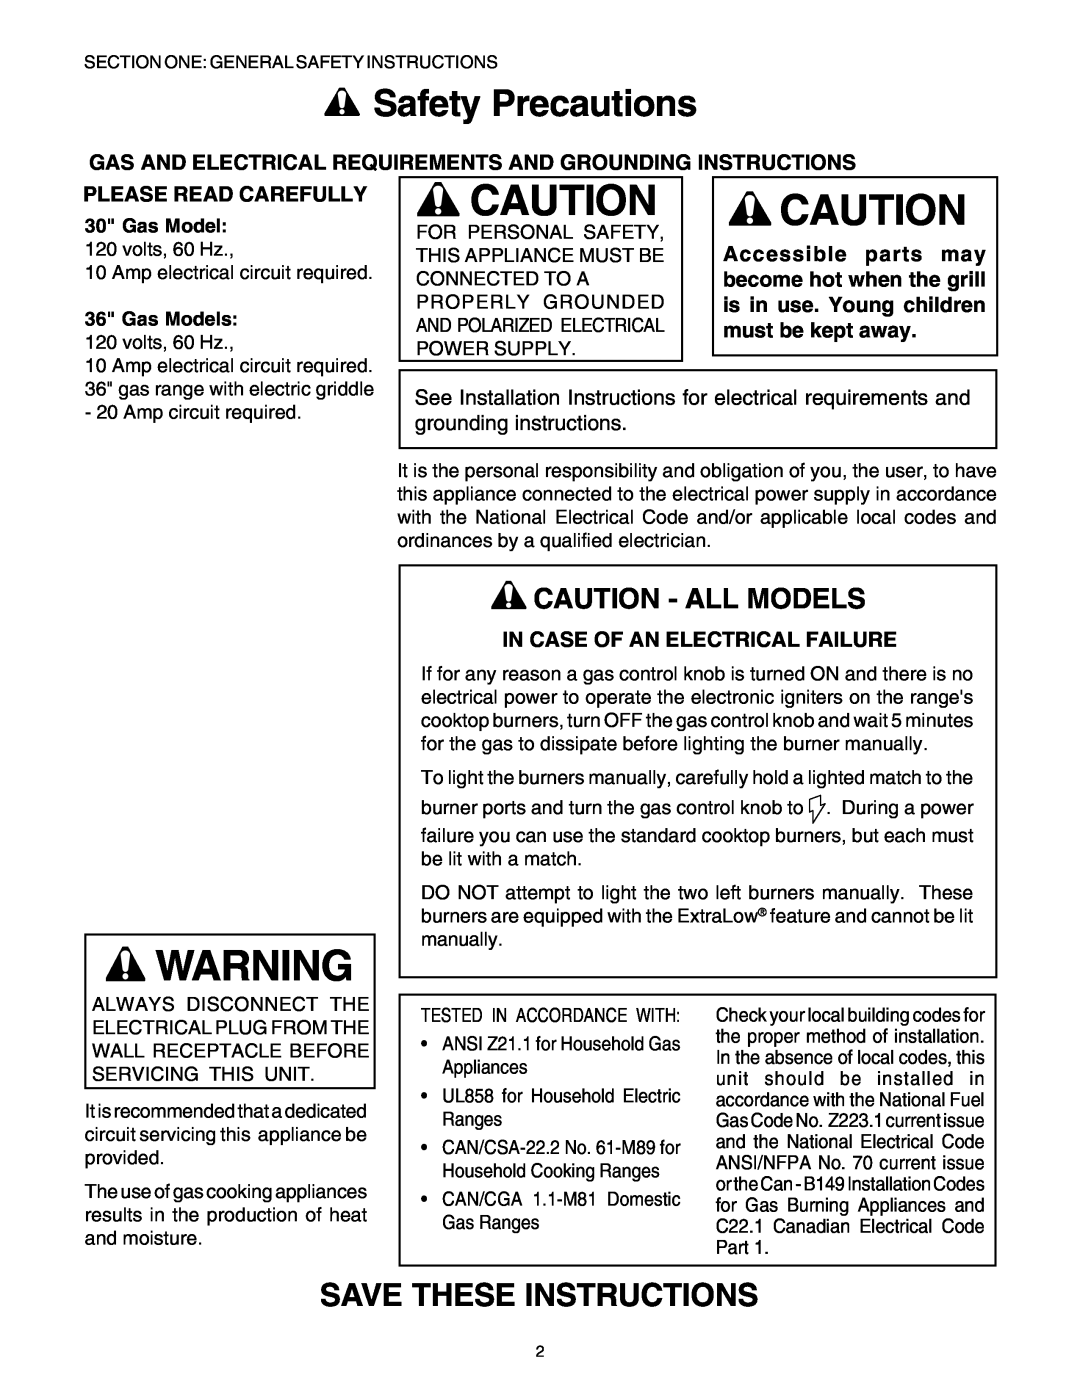 Thermador P30 P36 Safety Precautions, Save These Instructions, Caution - All Models, Please Read Carefully, Gas Model 